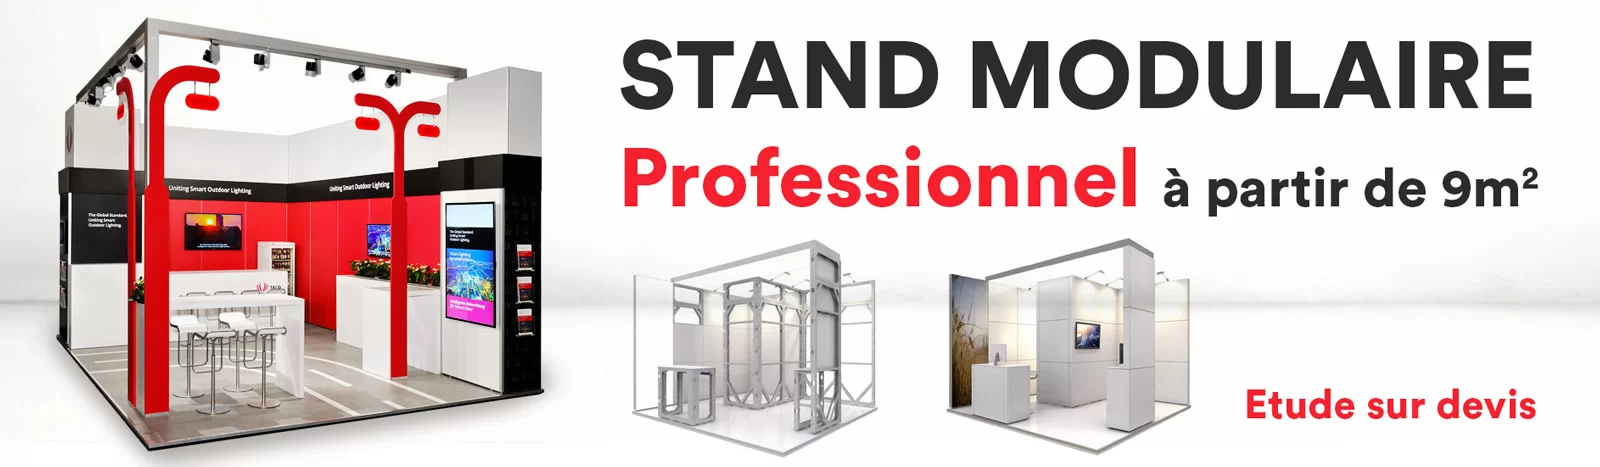 stand modulable professionnel